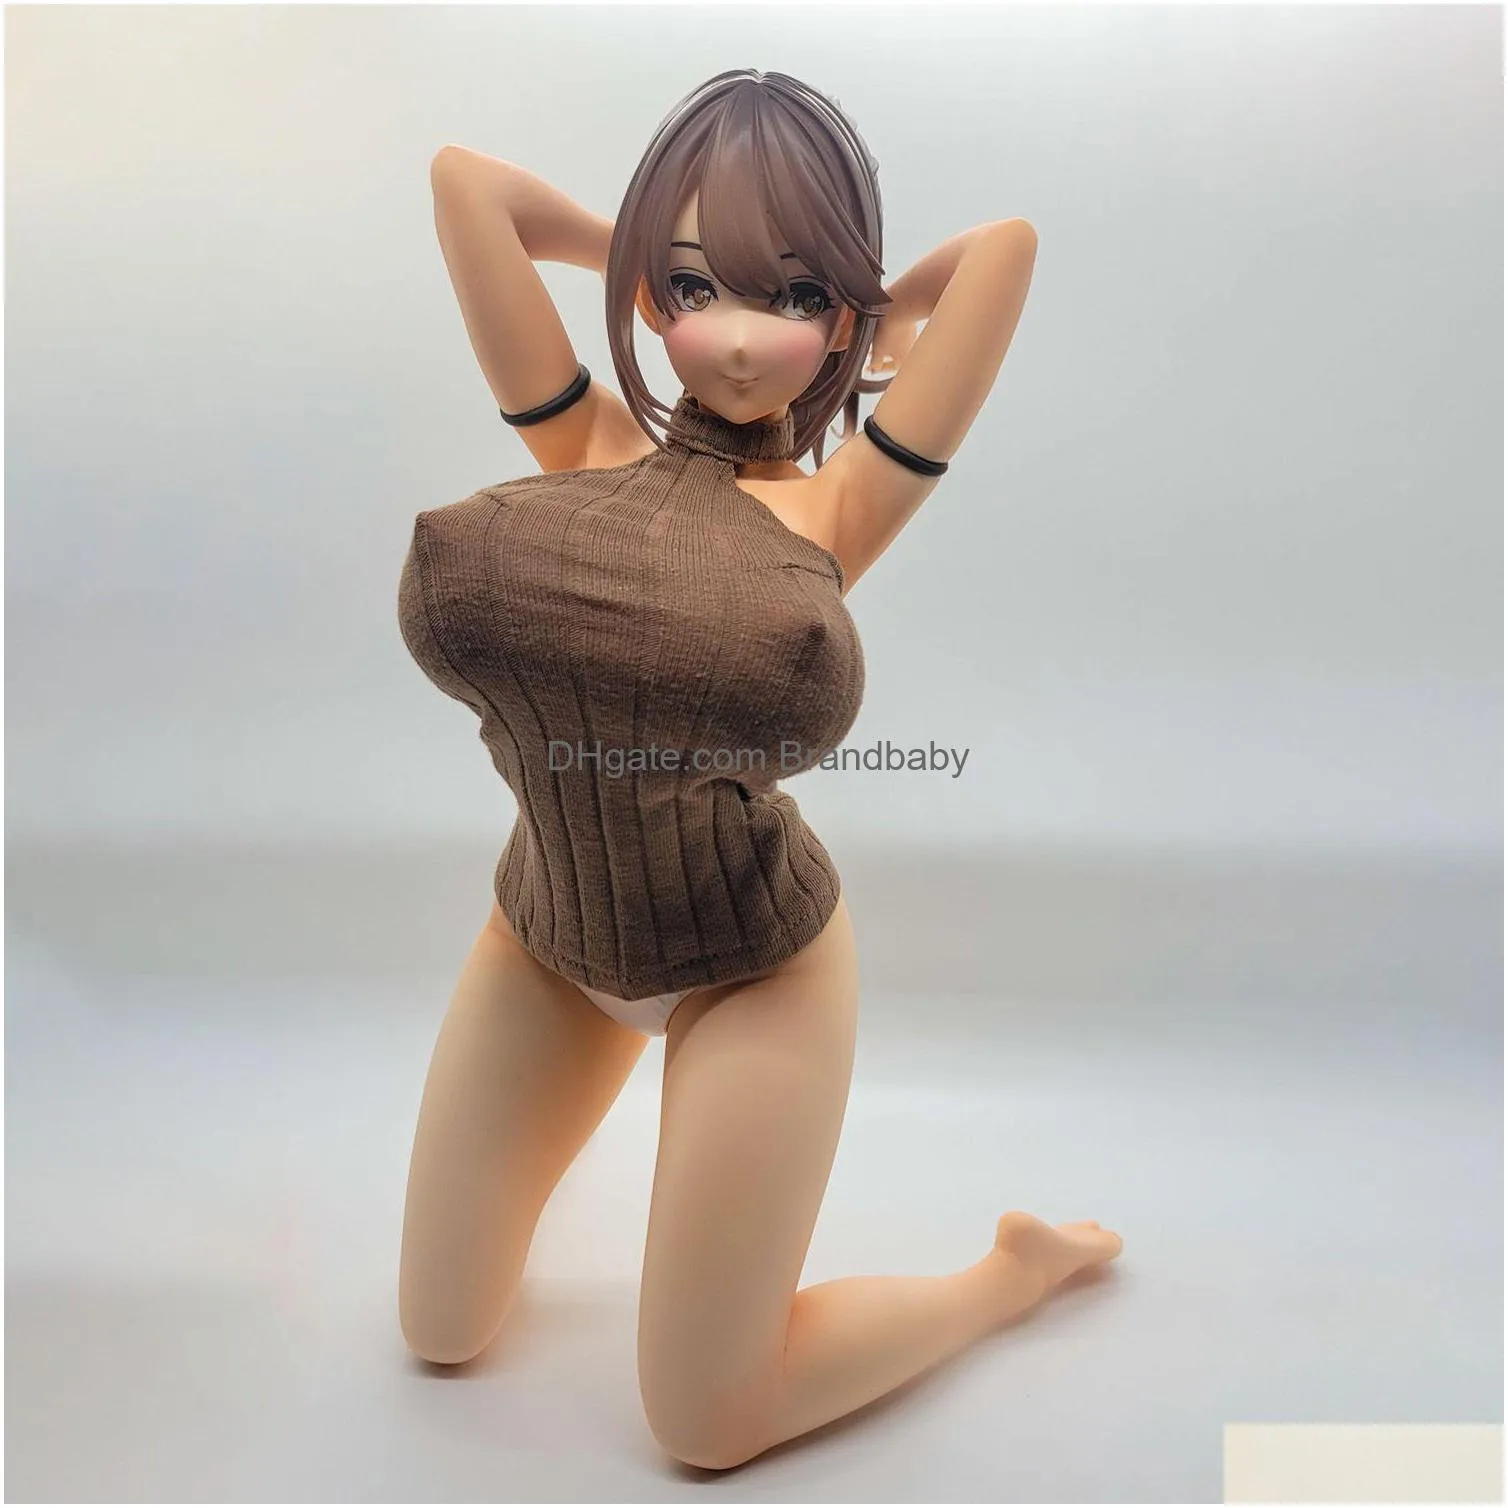 cartoon figures 27cm nsfw native hinano sexy nude girl model pvc anime action hentai figure adult toys doll gifts